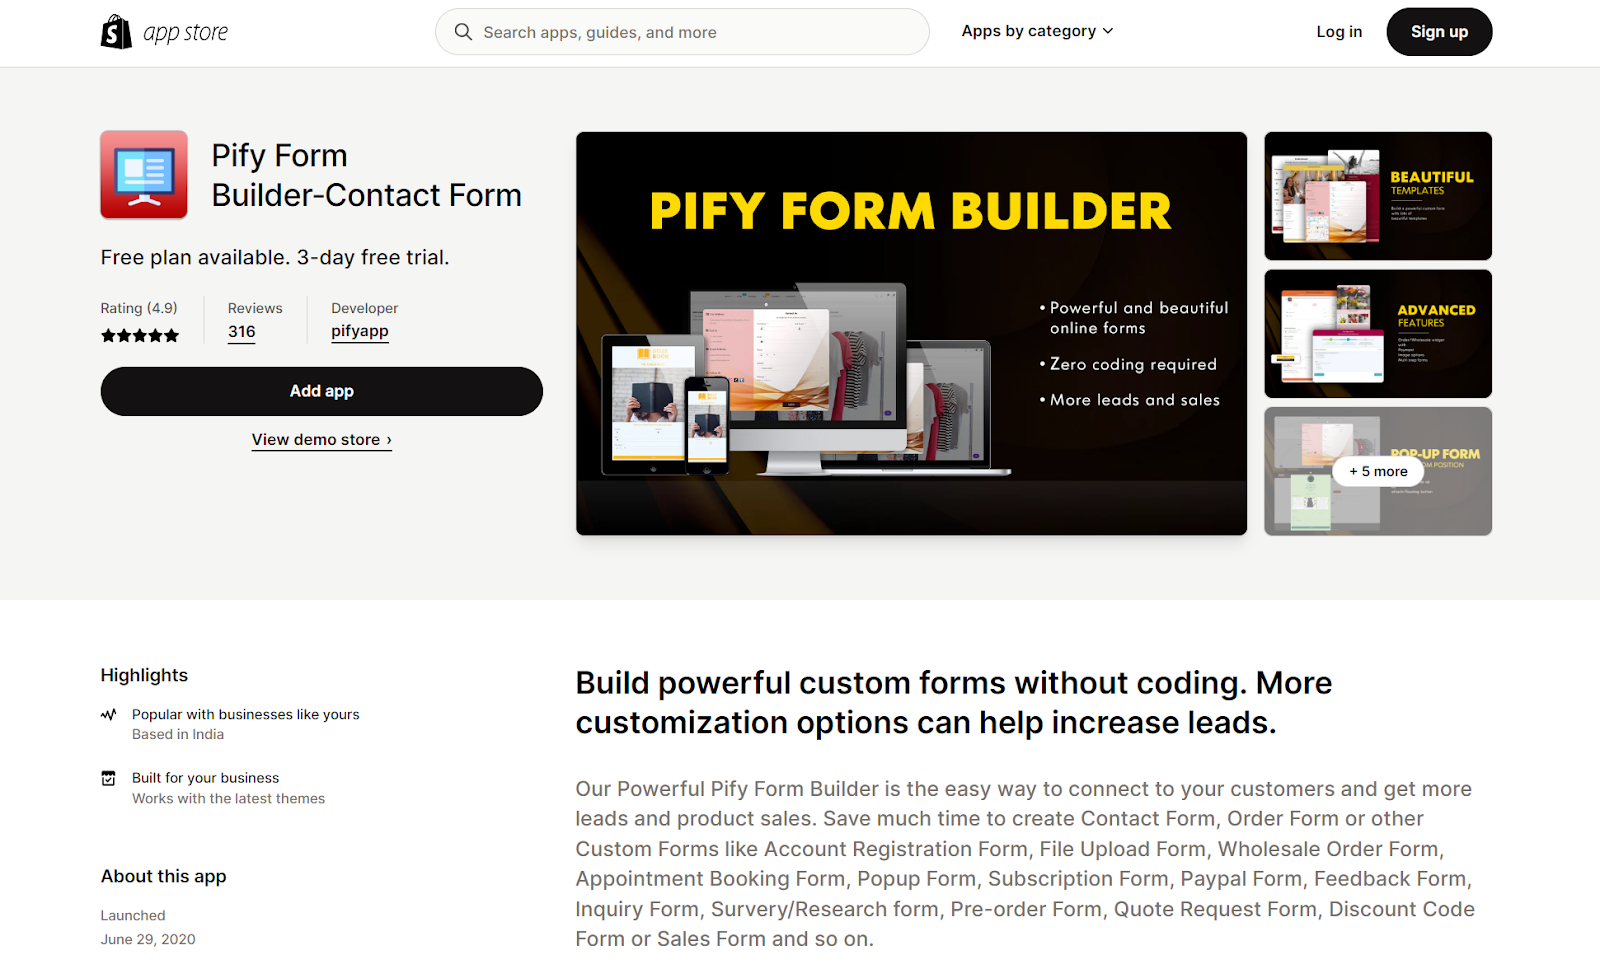 App Store - Pify form builder